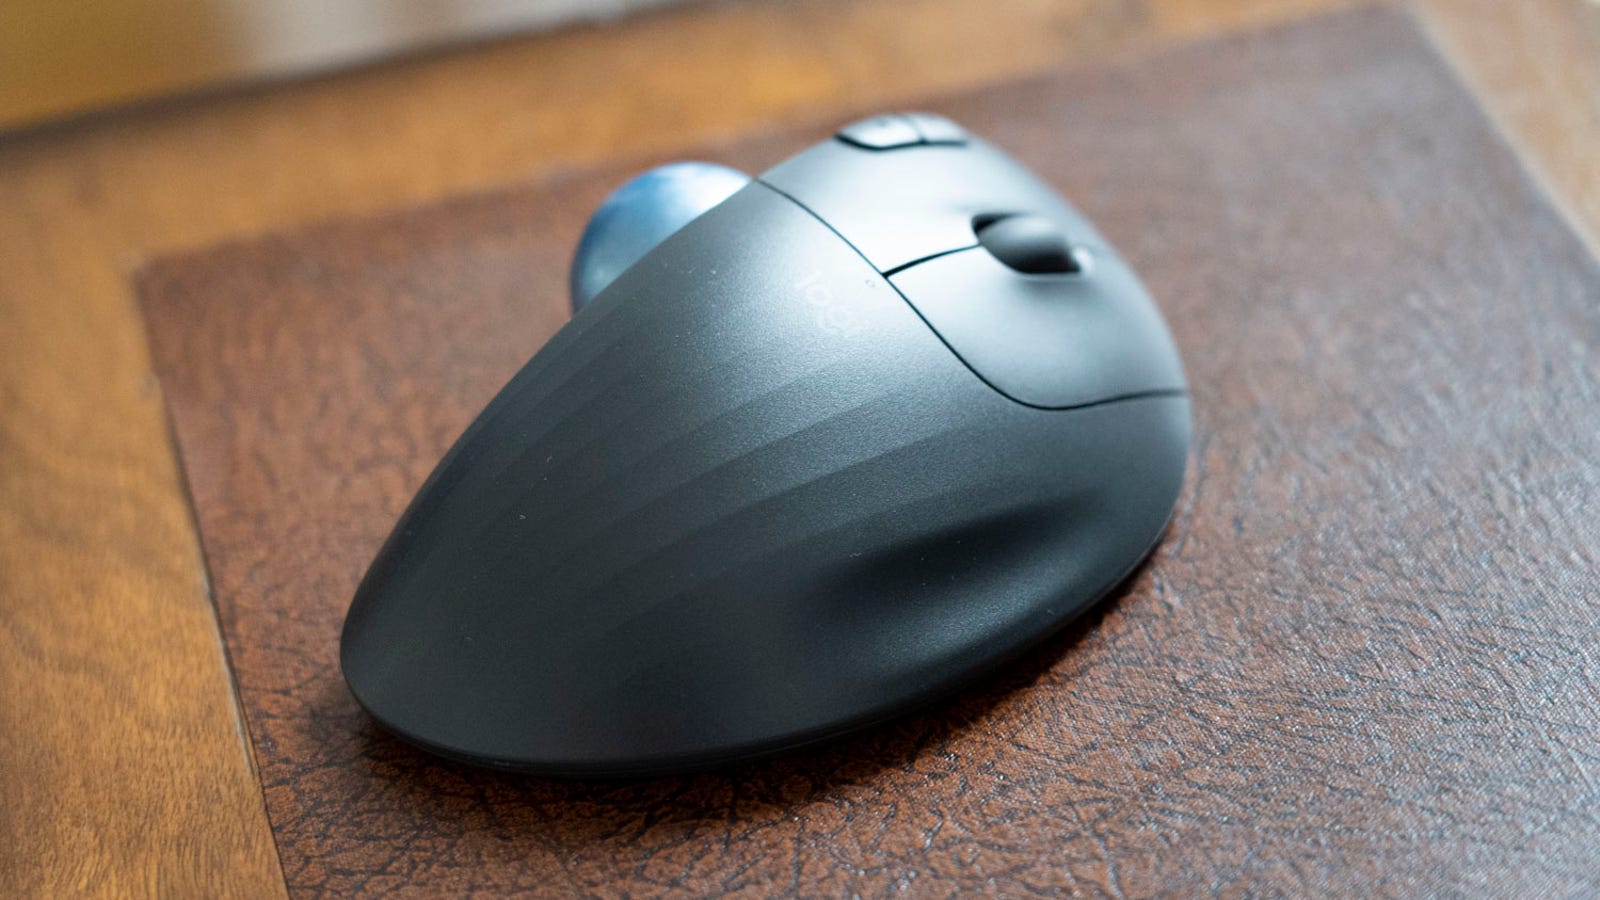 Illustration for article titled Logitech Improved on the Nearly Flawless Trackball